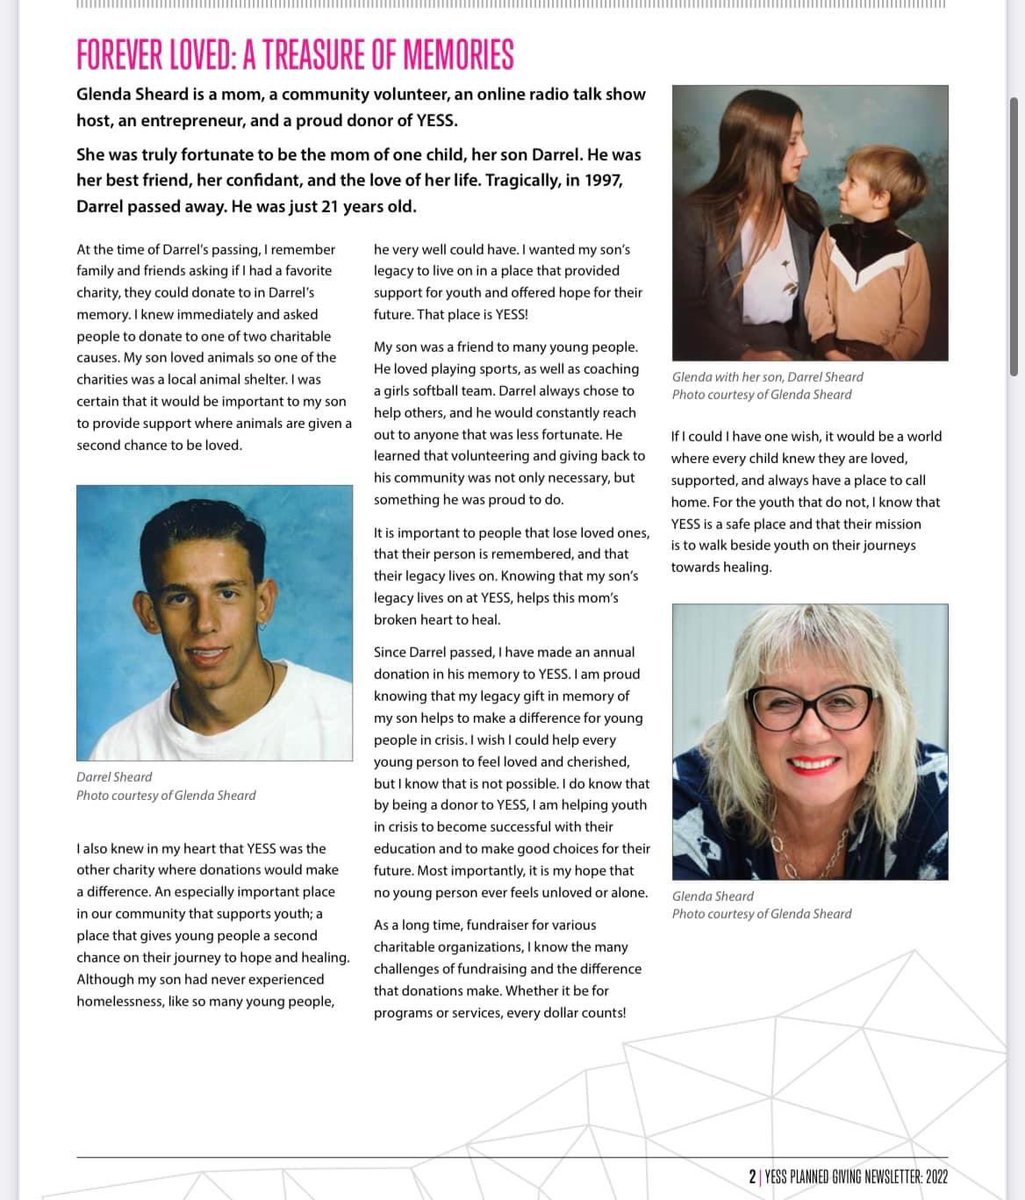 I am a very proud donor of YESS.
SO very proud to share my son Darrel’s legacy in the YESS Planned Giving newsletter,  last Fall.
For more info on how you can support YESS, please check out: YESS.org 

#YESS #plannedgiving #beadonor #SupportOurYouth